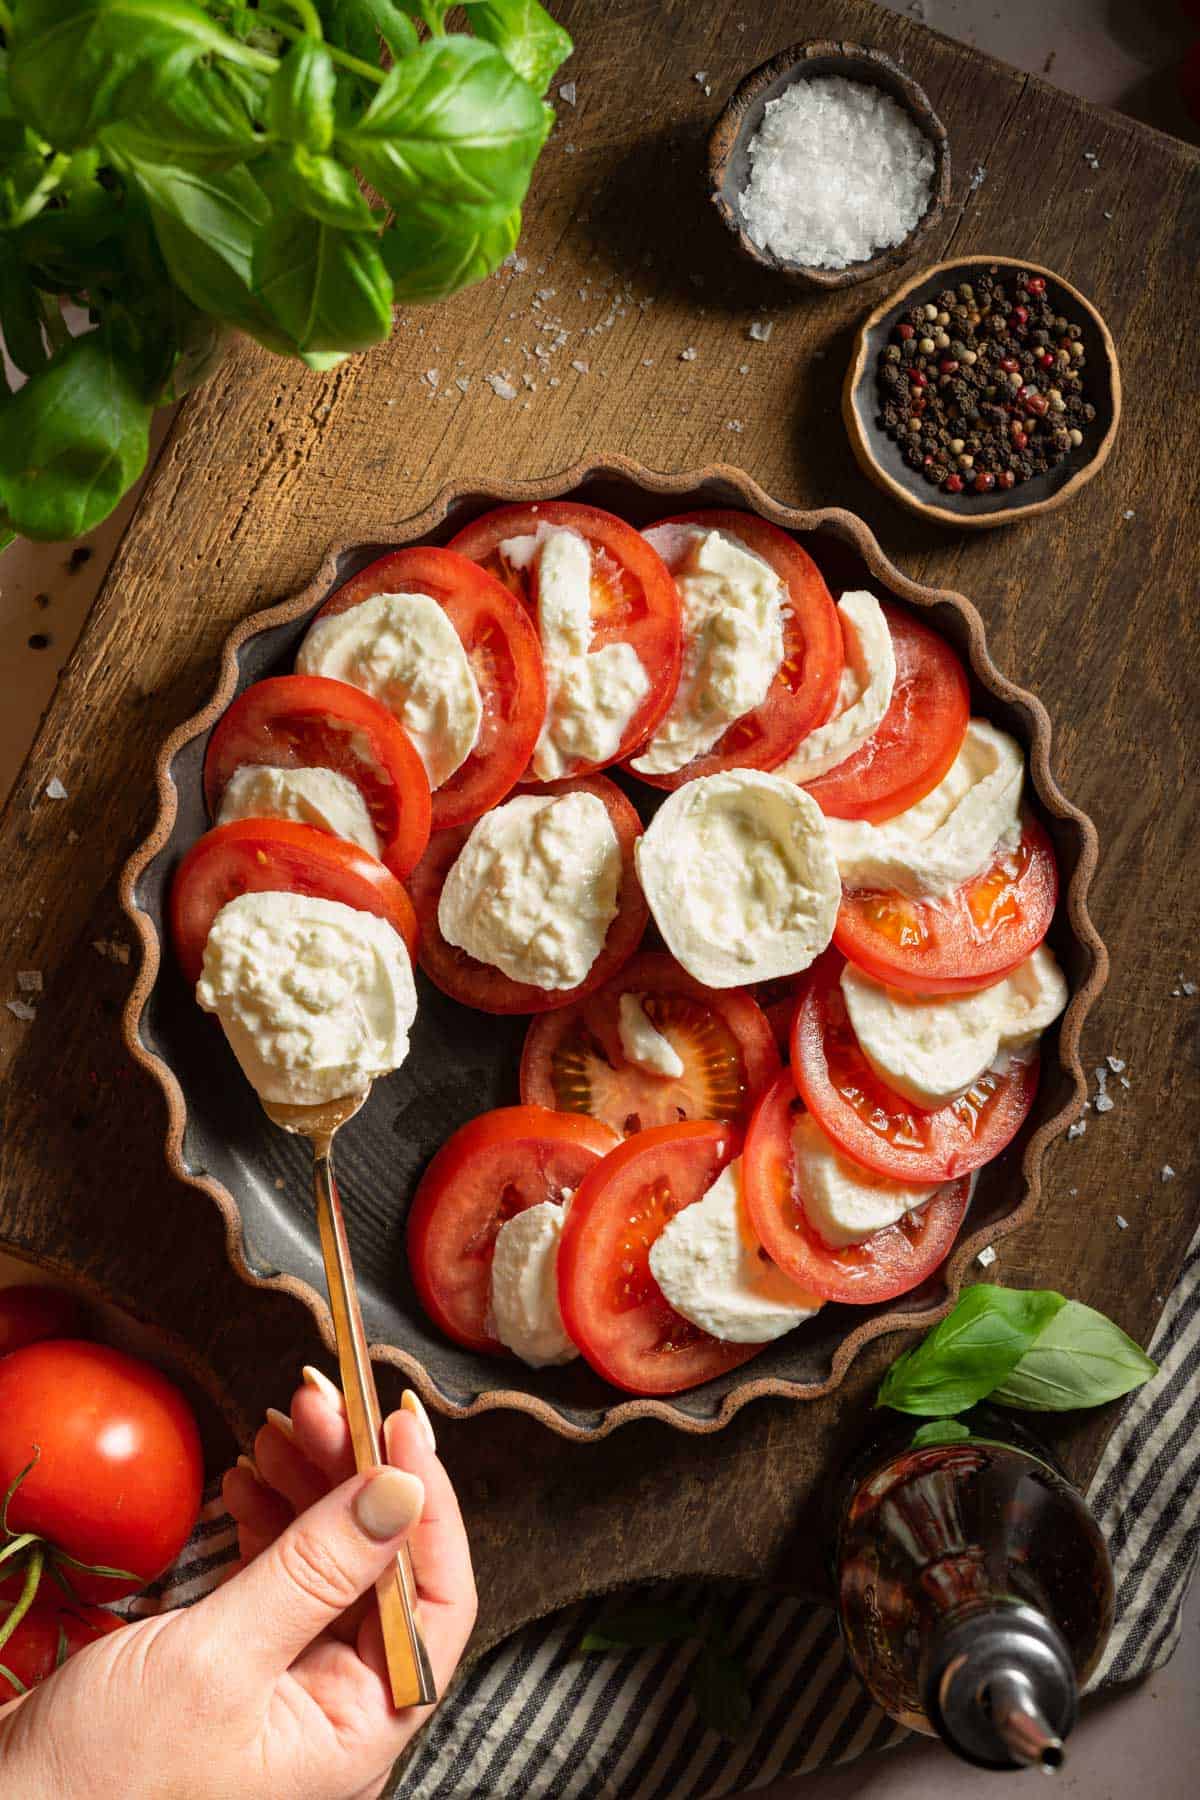 Adding burrata to a plate of tomatoes.